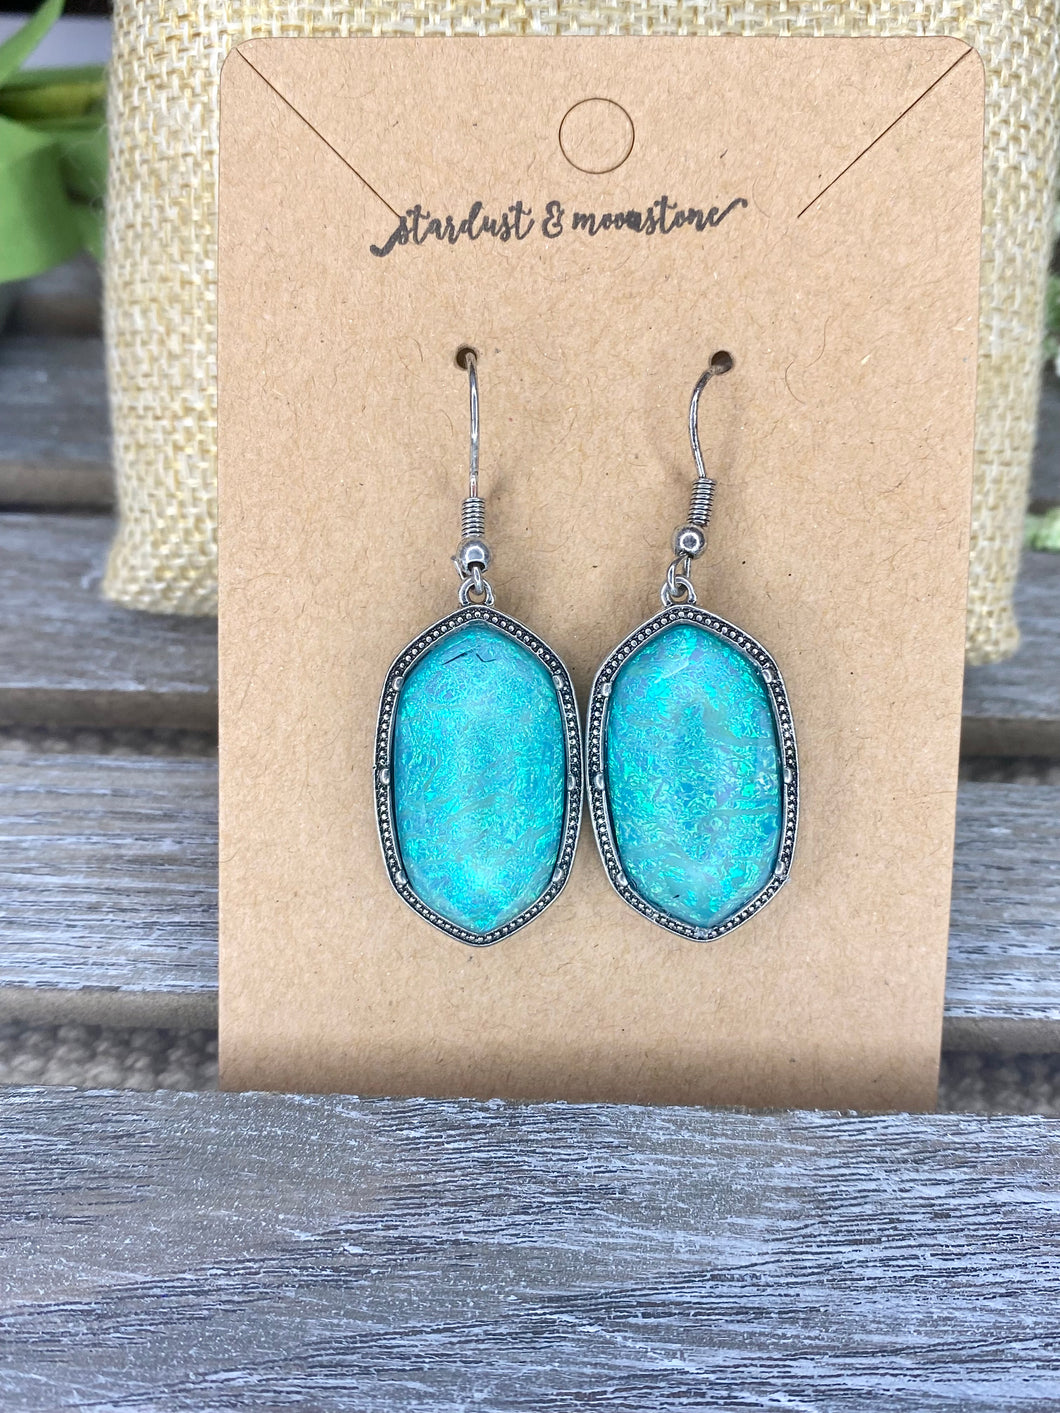 Faceted Cove Earrings in Turquoise or Black - Stardust & Moonstone